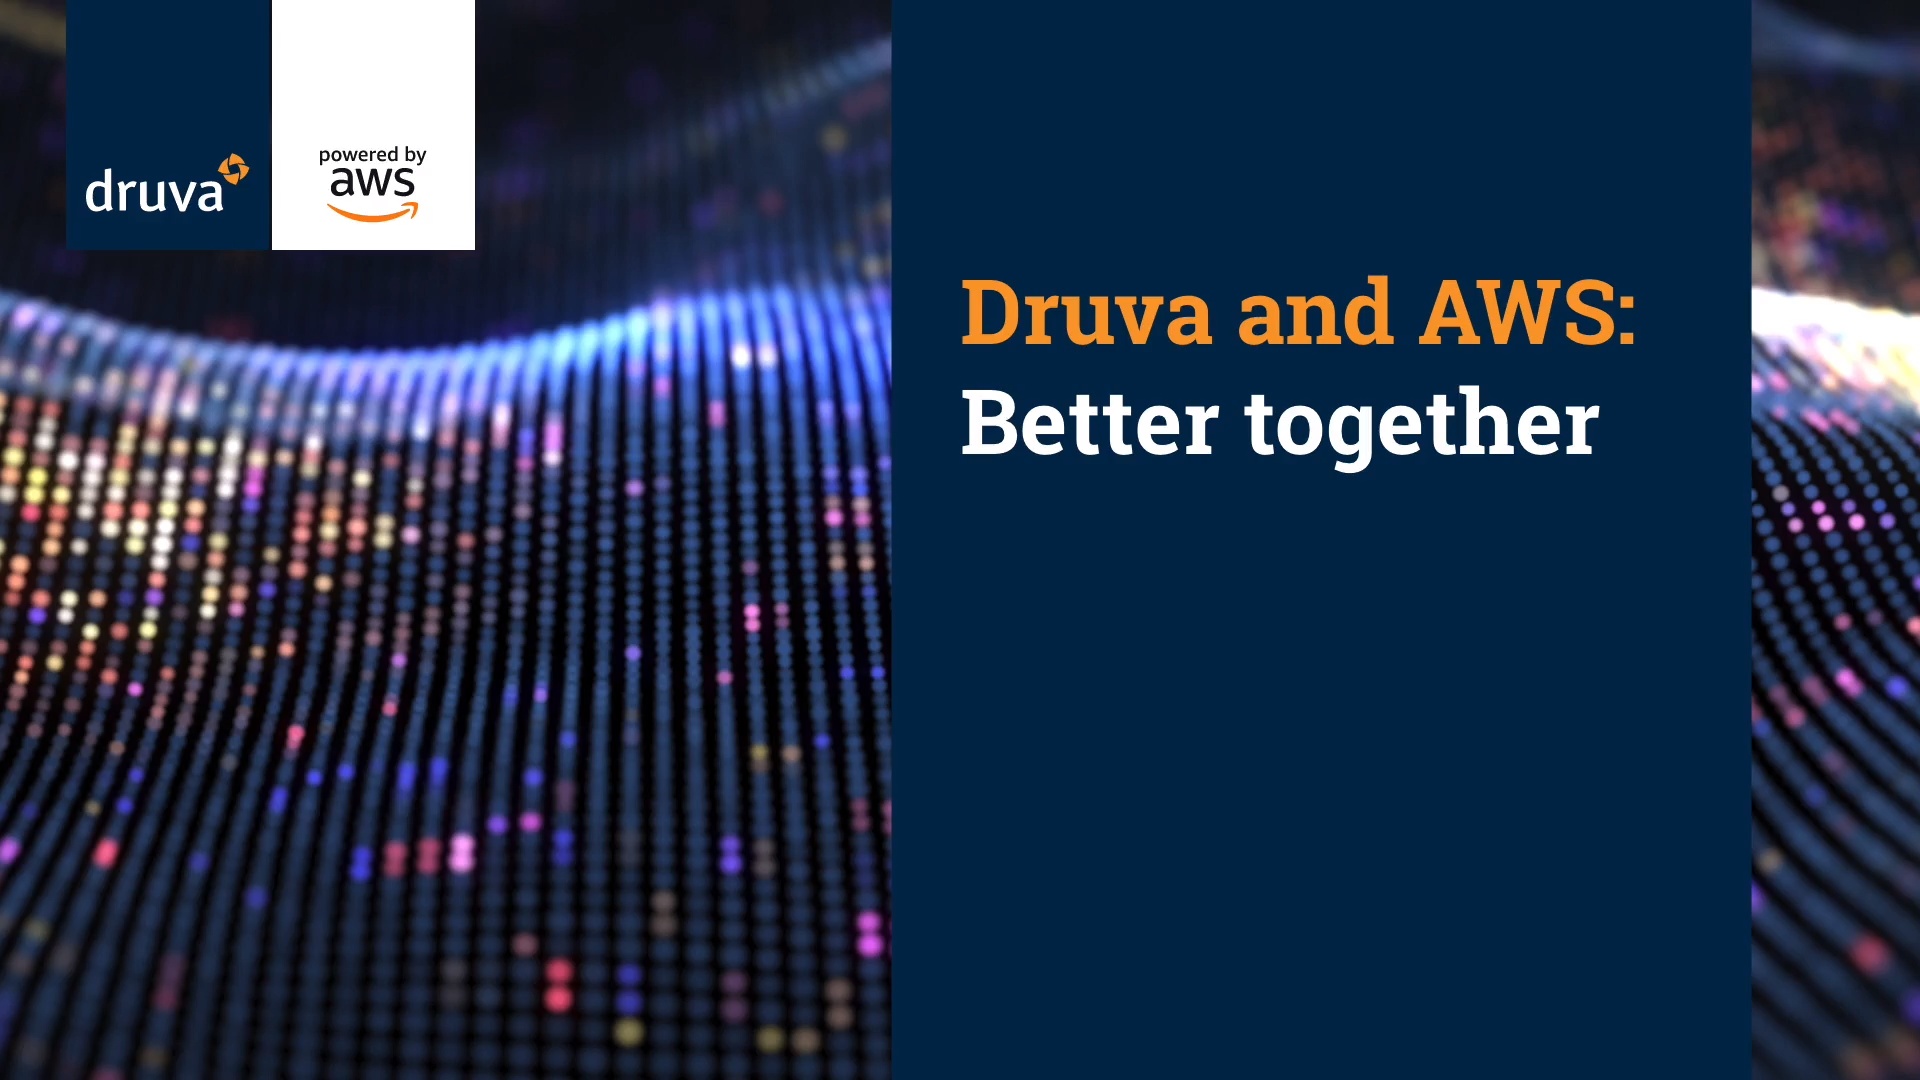 Druva and AWS: Better together